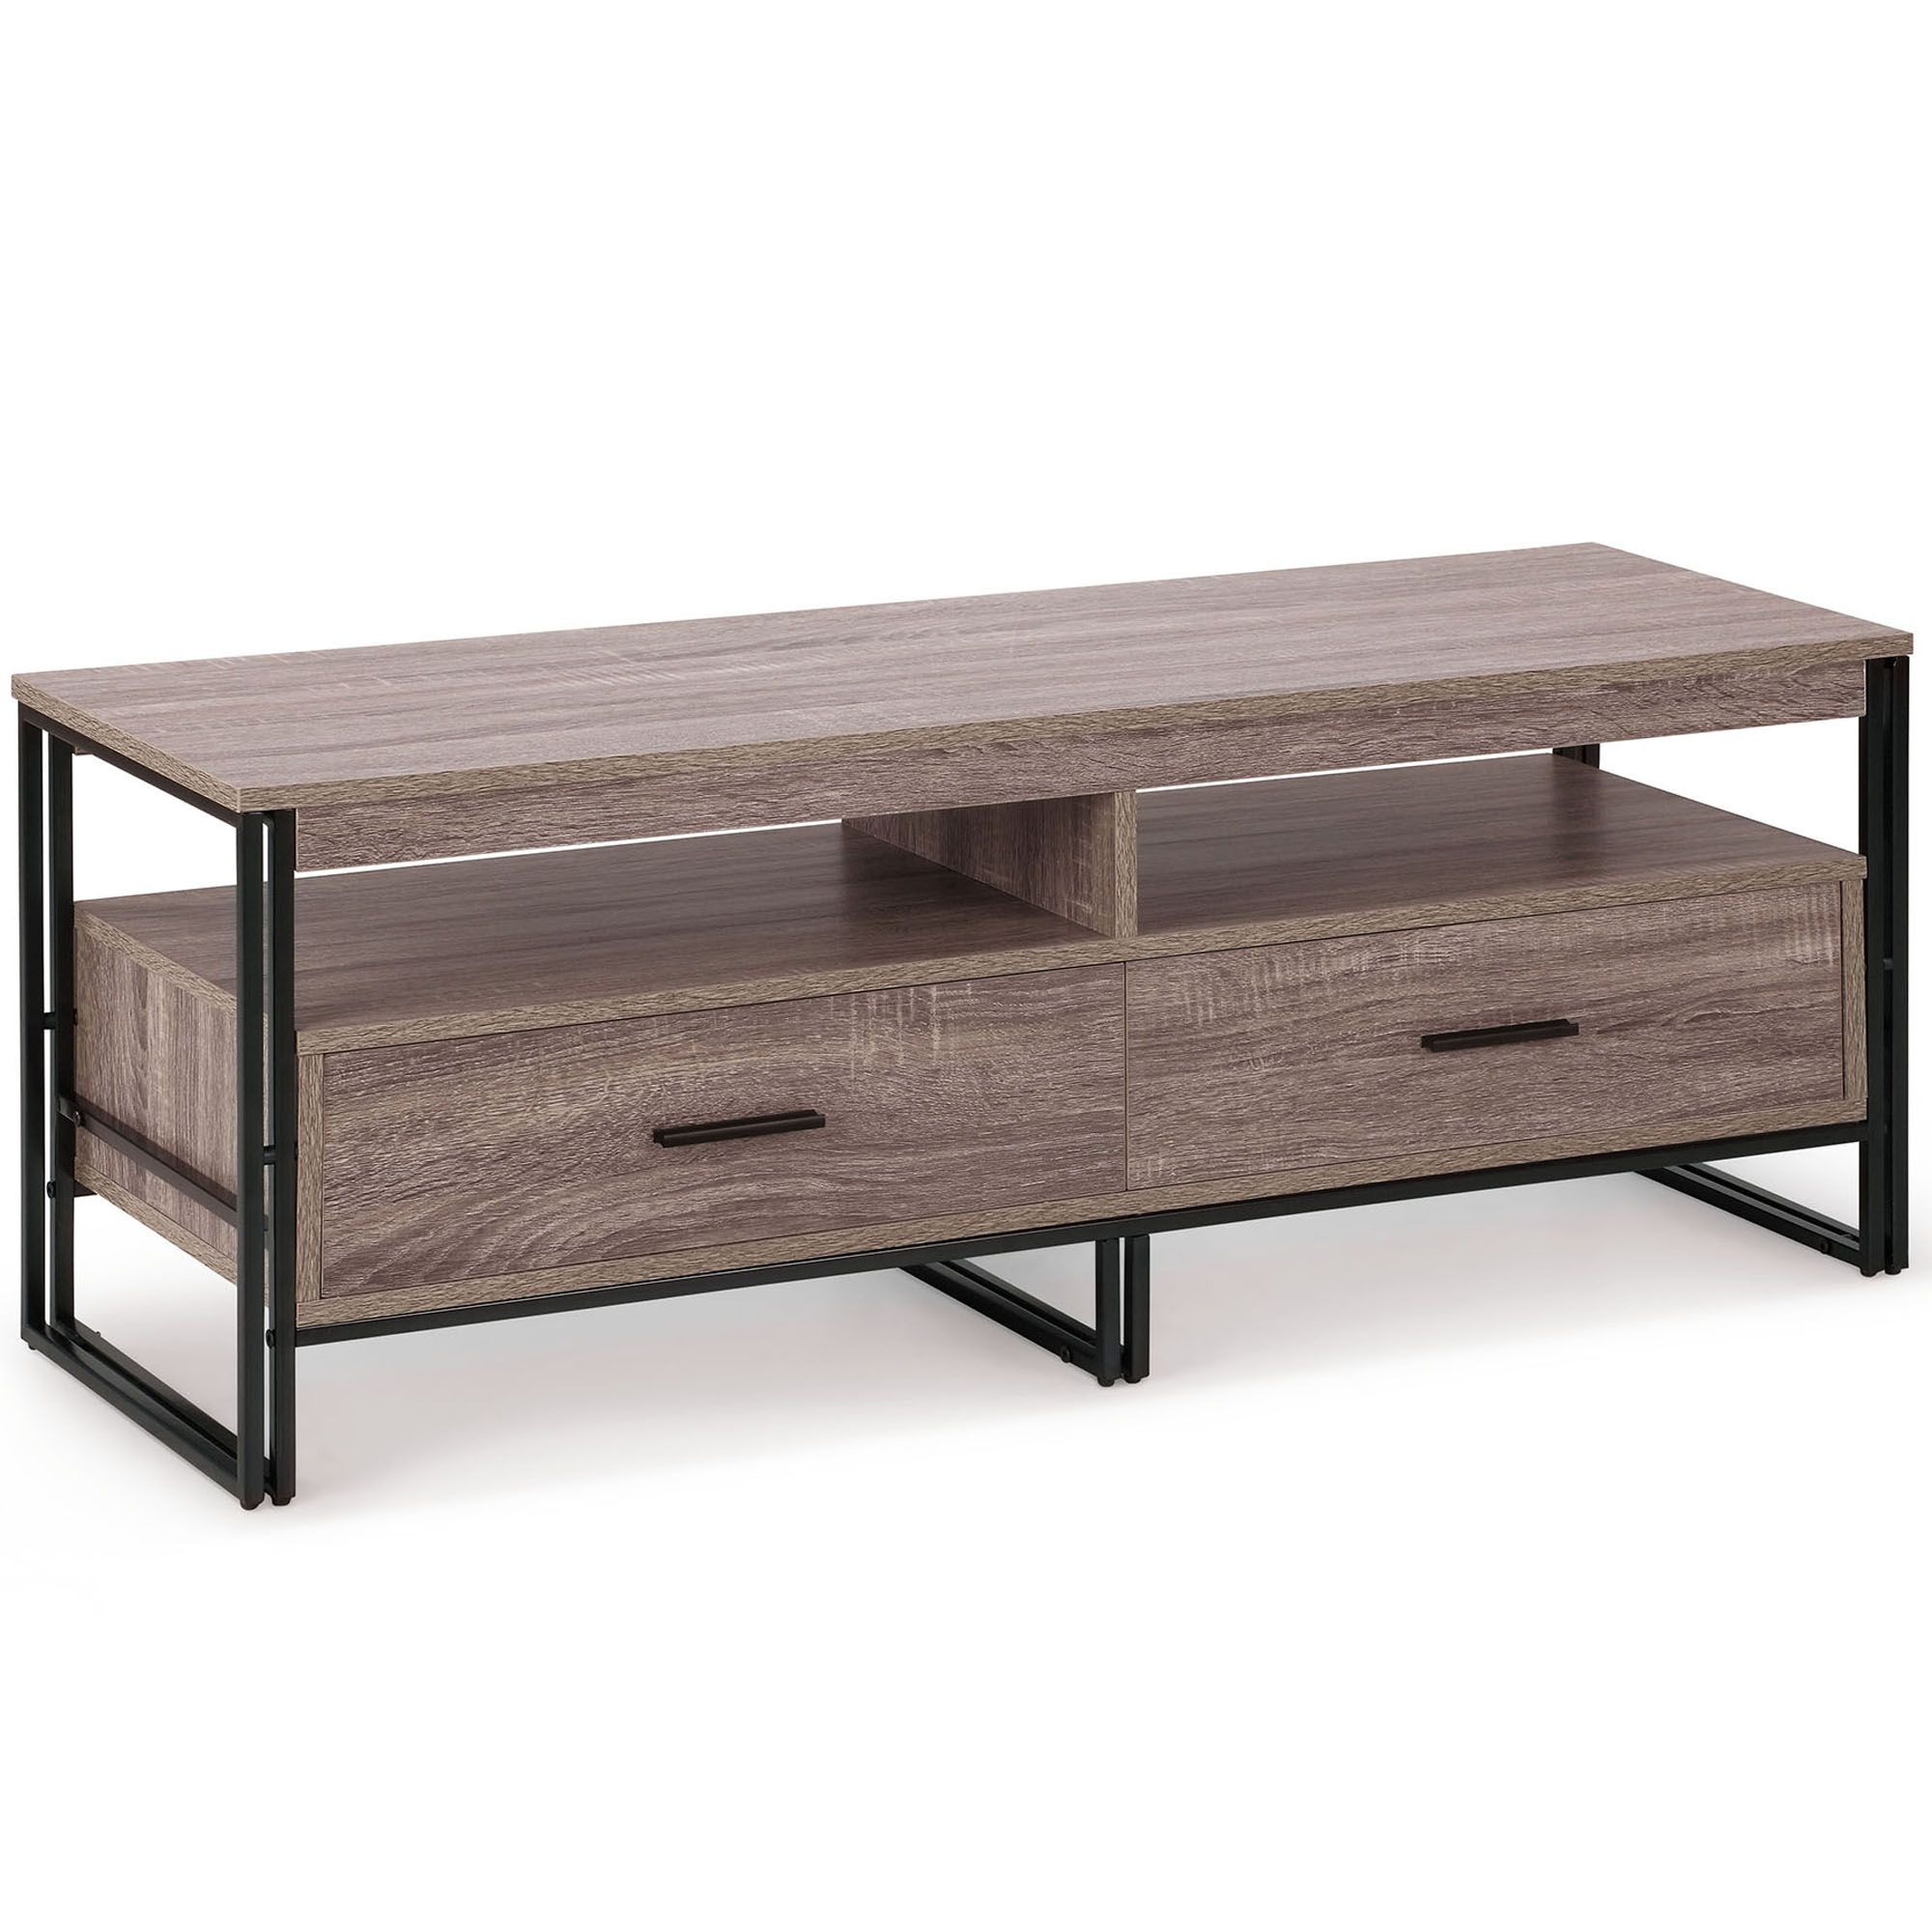 Vonhaus Tv Unit – Industrial Tv Stand Cabinet With 2 Drawers, Walnut Within Walnut Wood Storage Trunk Console Tables (View 7 of 20)